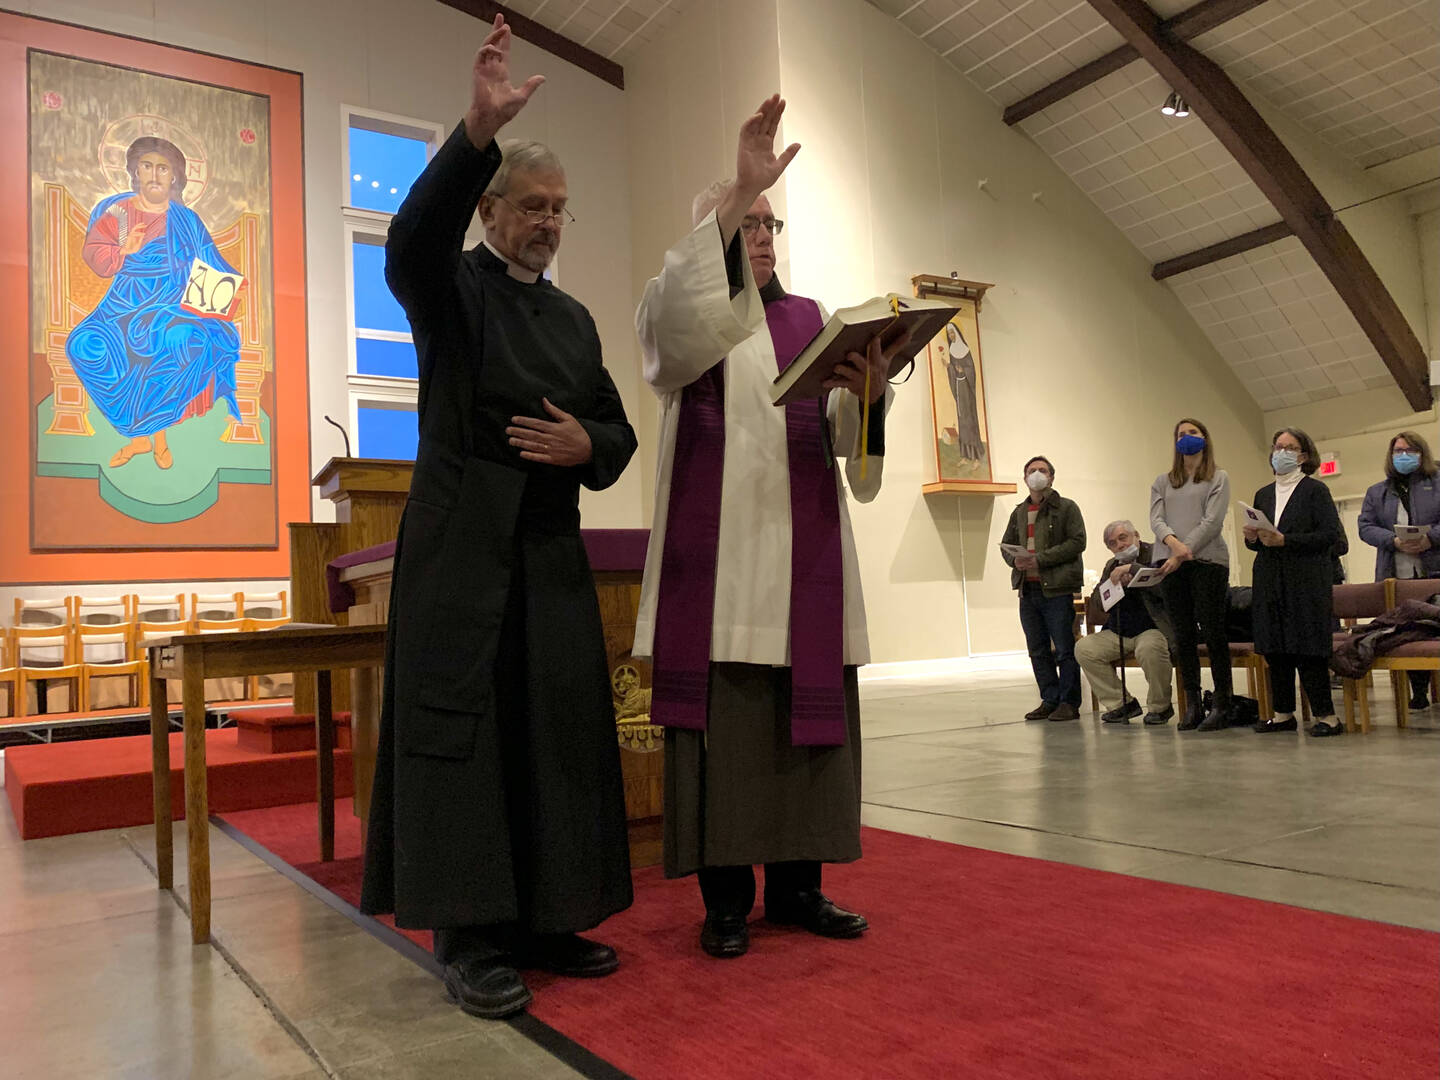 Father Steven Schunk, an Episcopalian priest, and Father Loughran raise their right hands together in blessing in front of an altar.